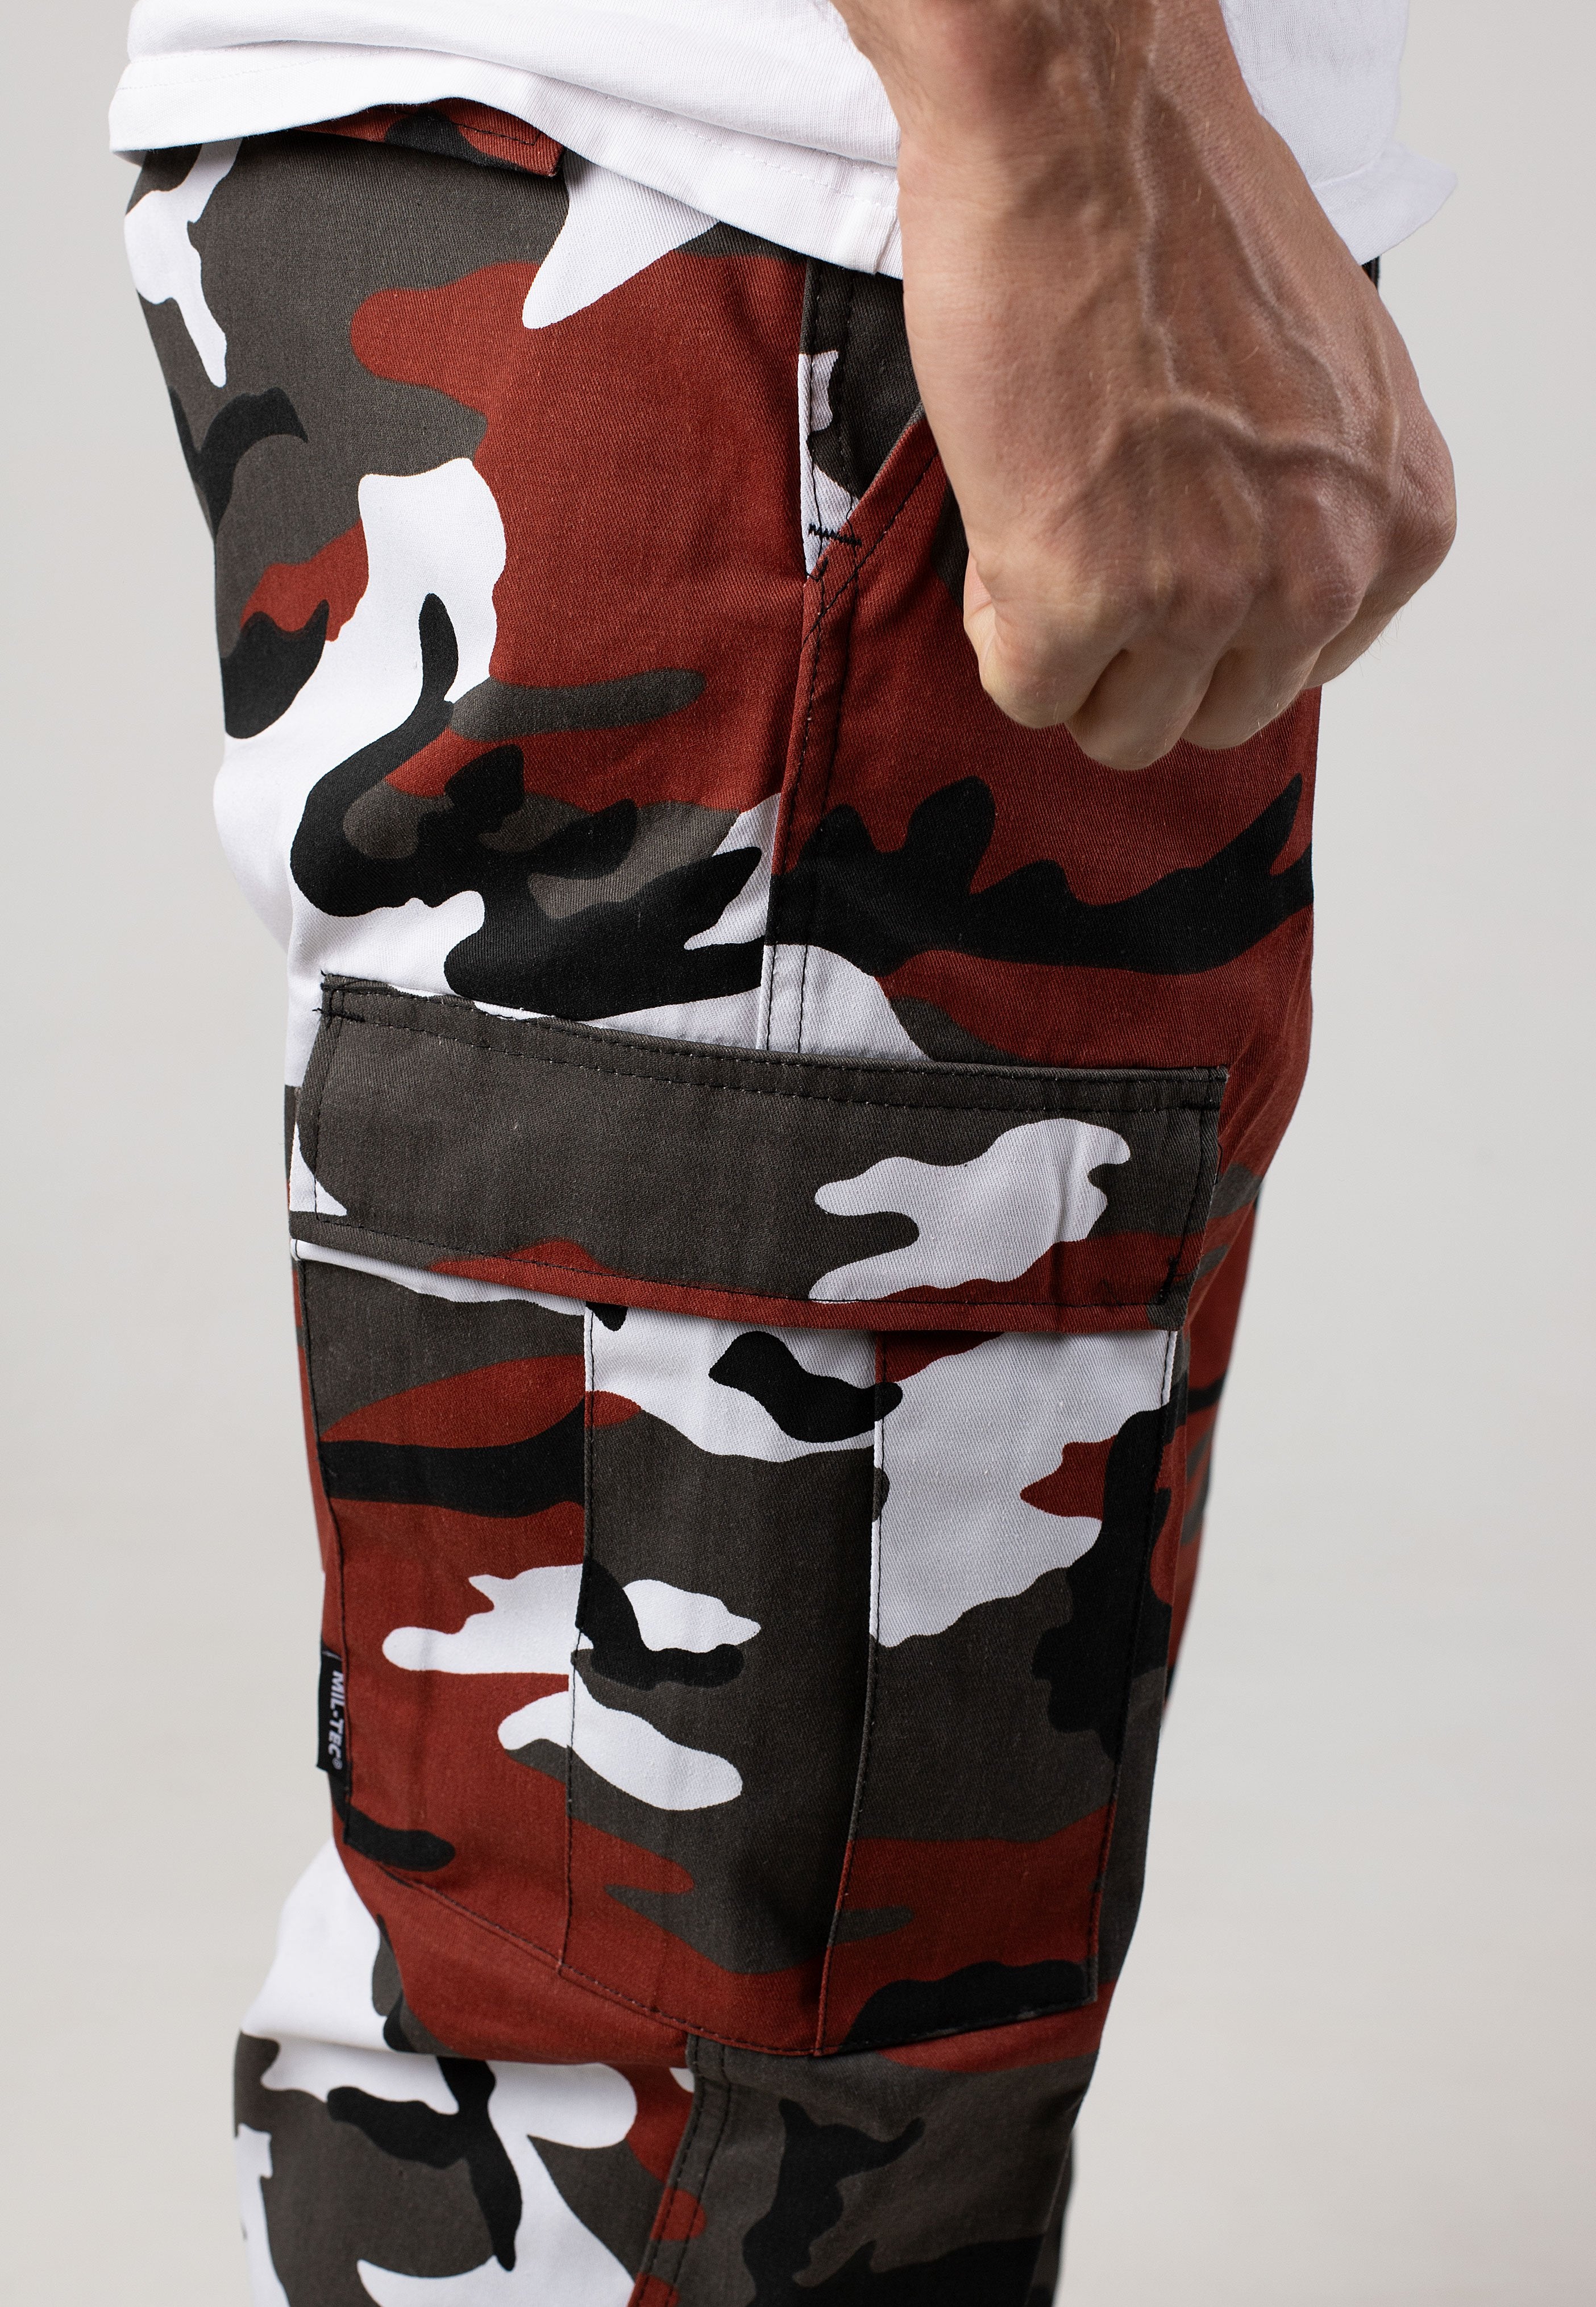 Mil-Tec - Ranger Red Camouflage - Pants